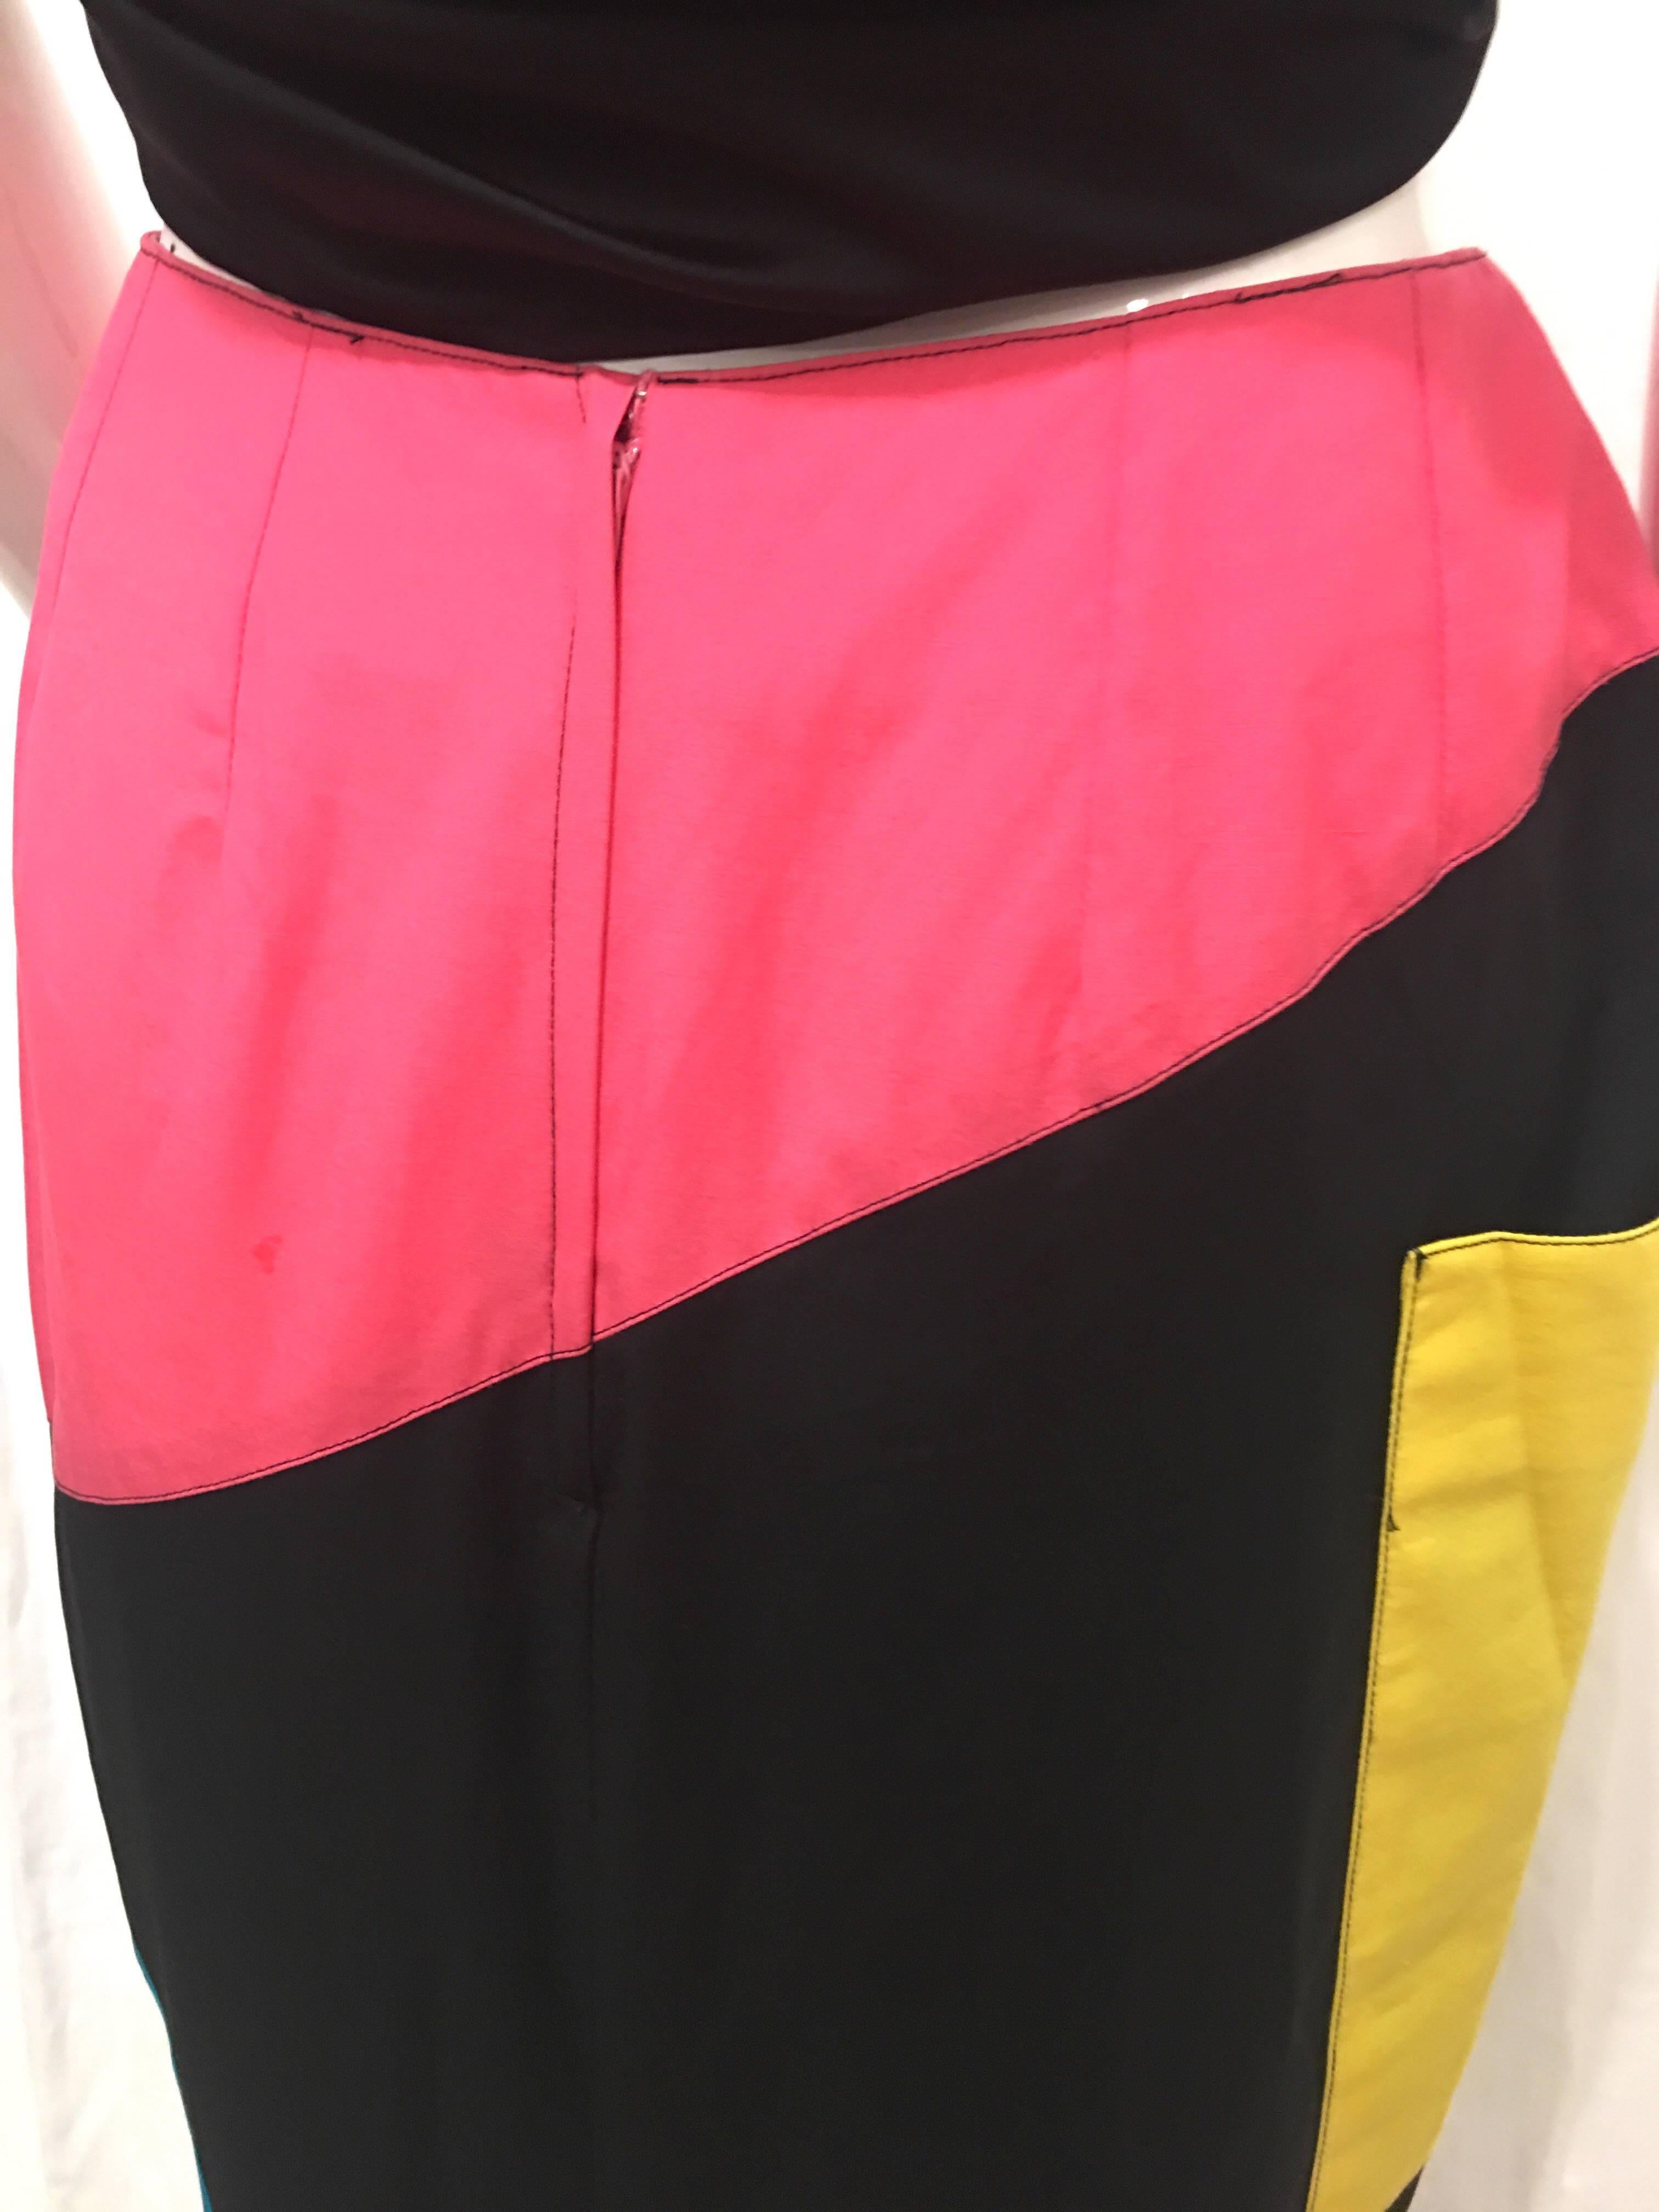 High waisted black pencil skirt with blue yellow and pink colorblock segments. Yellow segment is an oversized pocket that wraps around the side of the skirt. Hits right above the calves. Slit up the back to the bottom of the thighs allows for easier